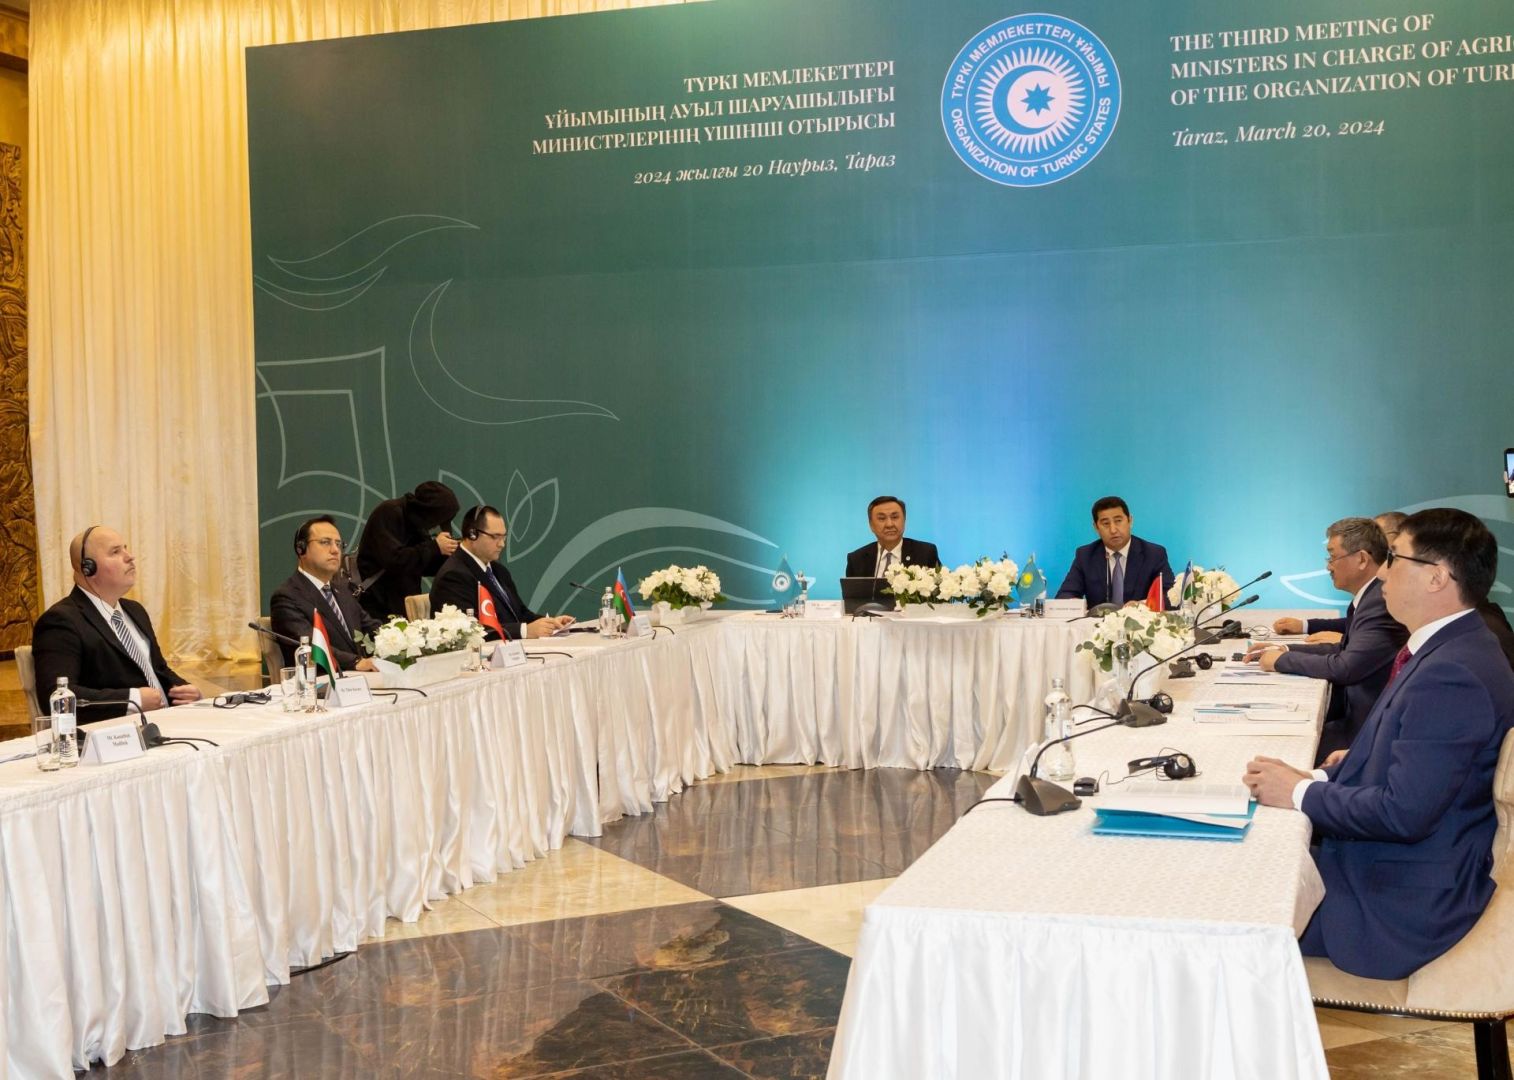 Azerbaijan represented at III Meeting of OTS Agriculture Ministers [PHOTOS]